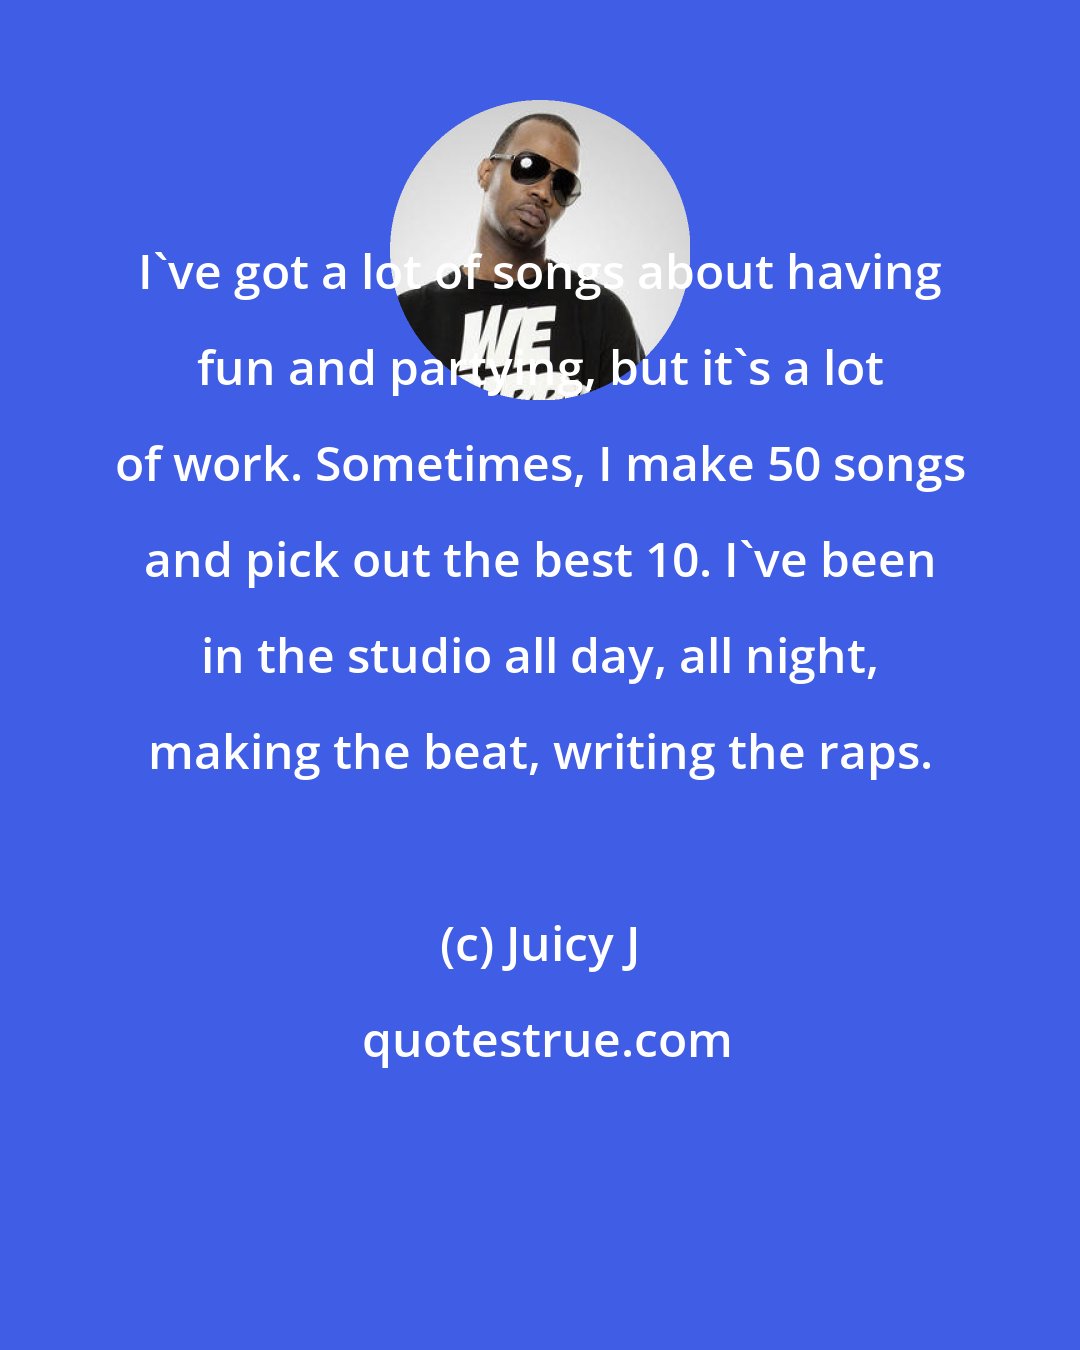 Juicy J: I've got a lot of songs about having fun and partying, but it's a lot of work. Sometimes, I make 50 songs and pick out the best 10. I've been in the studio all day, all night, making the beat, writing the raps.